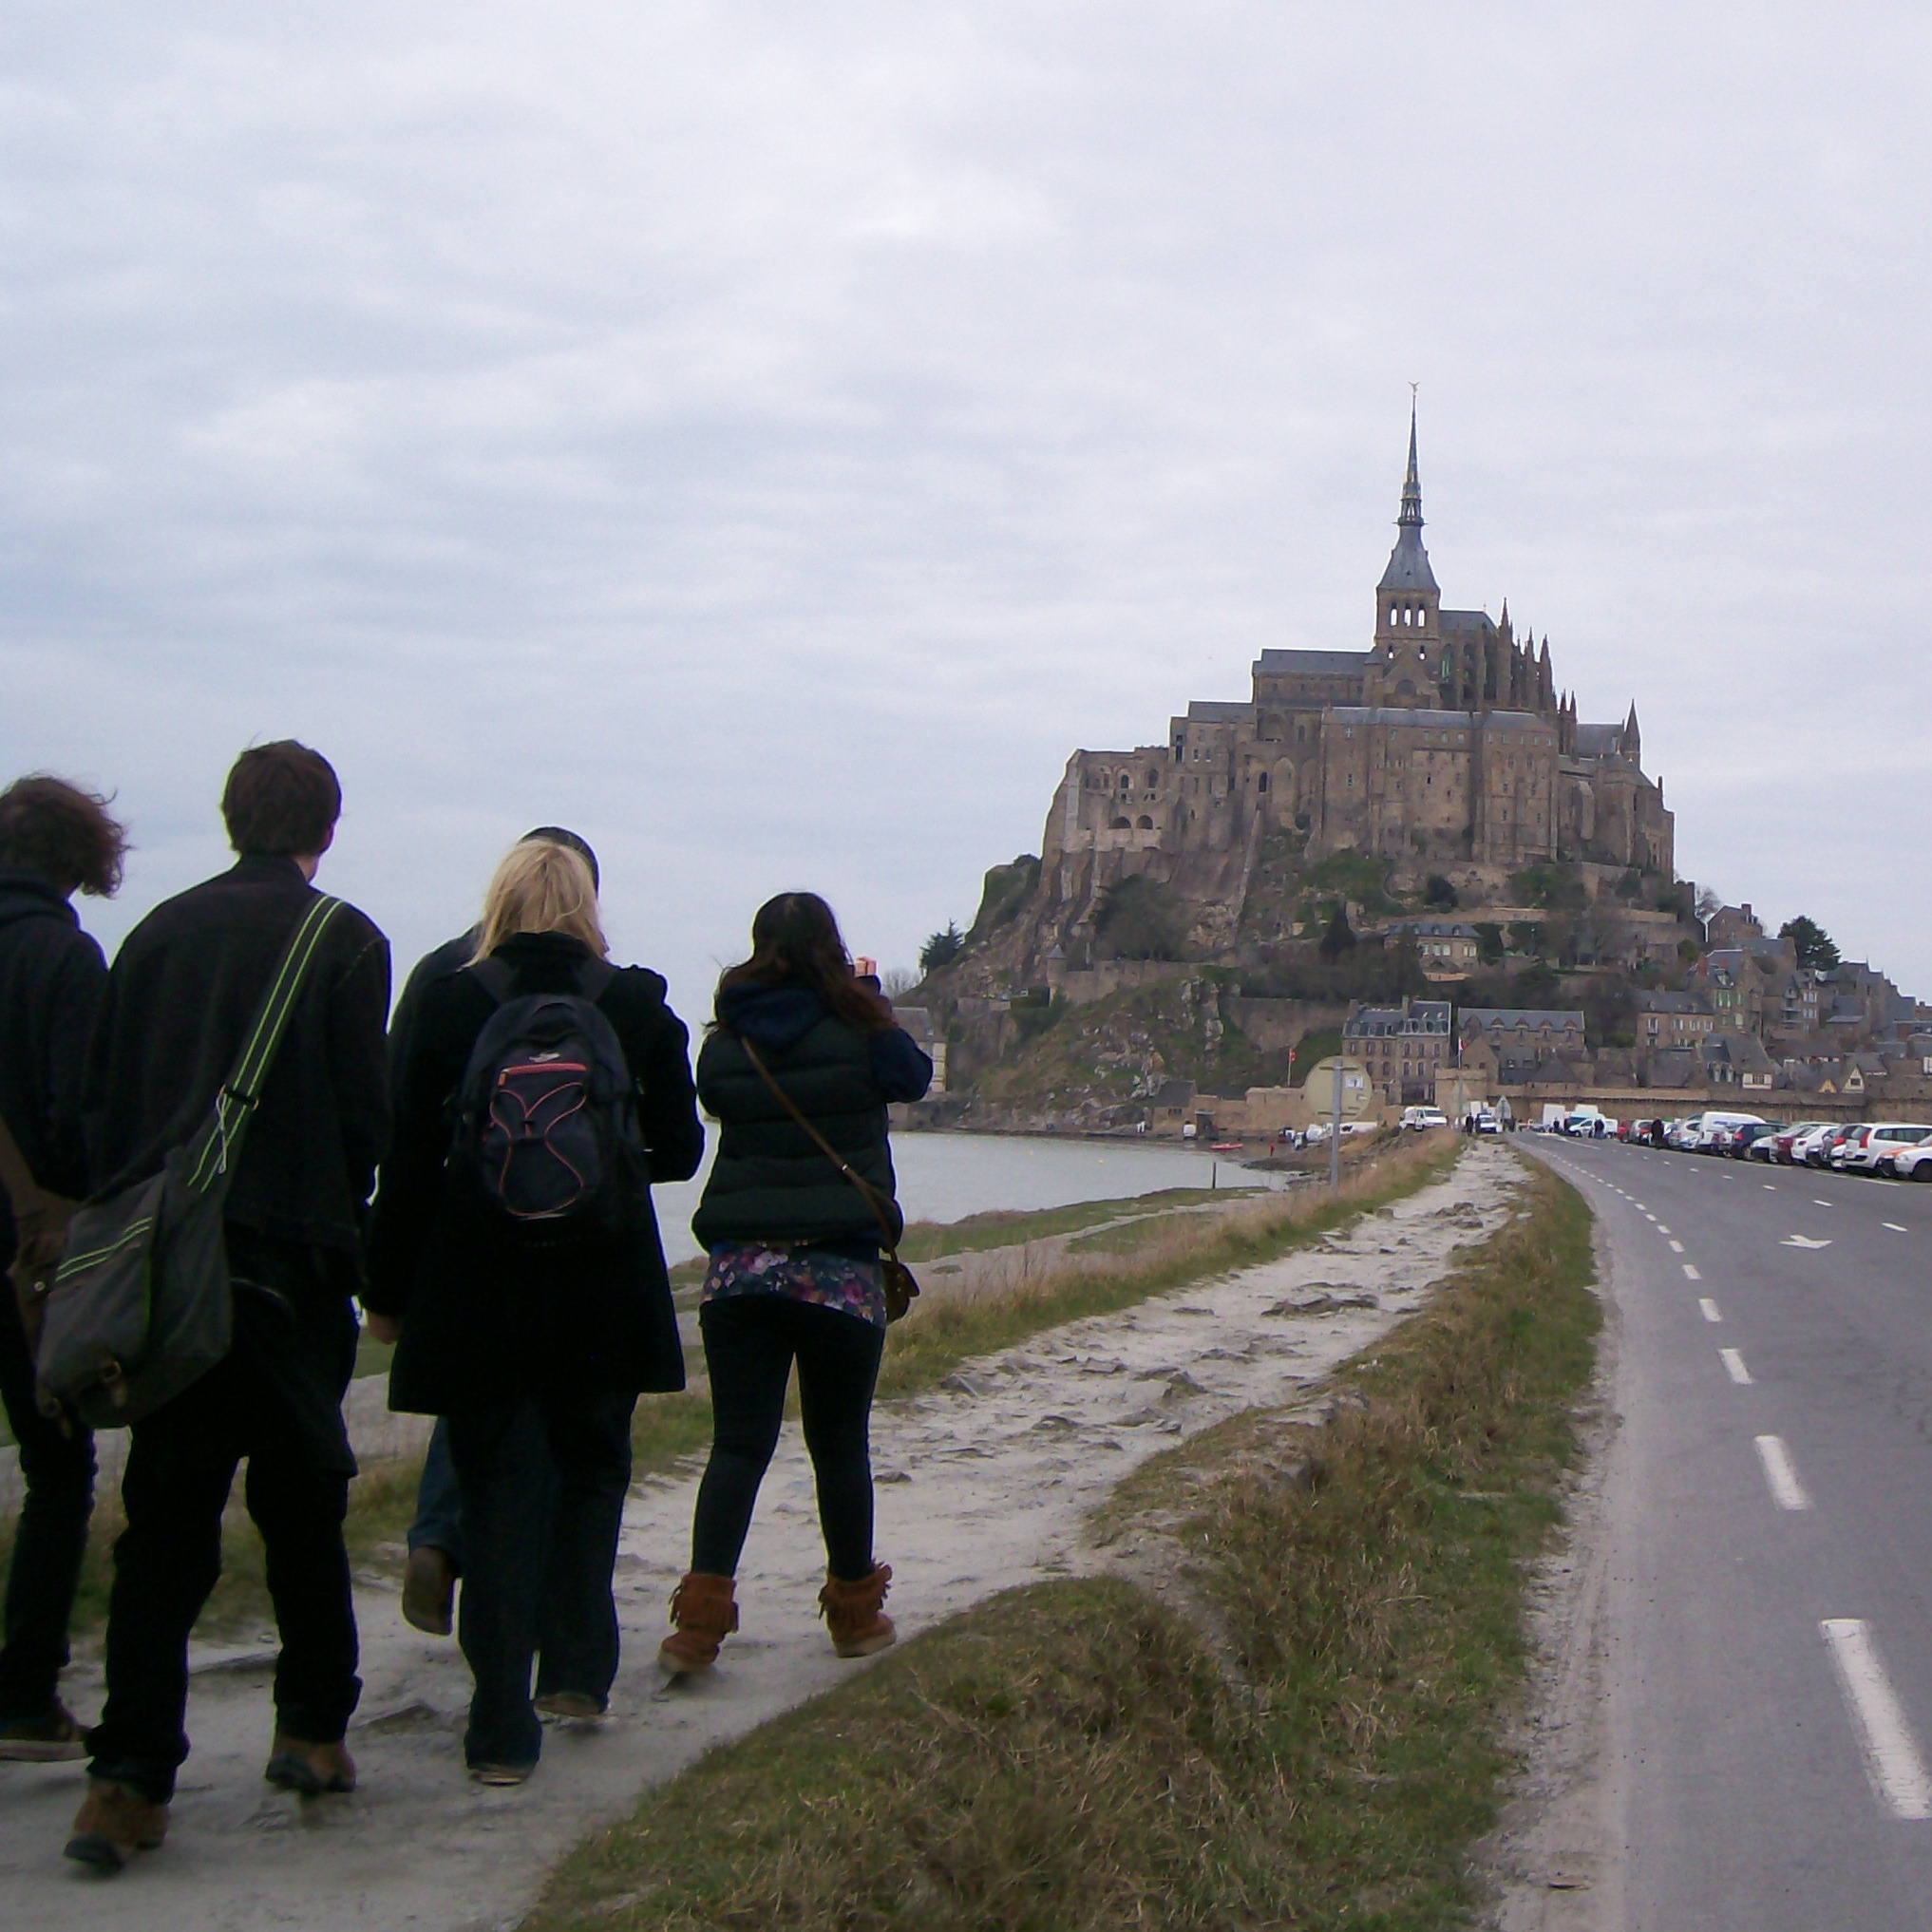 Archaeology students on a field trip, arriving at Mont St Michel